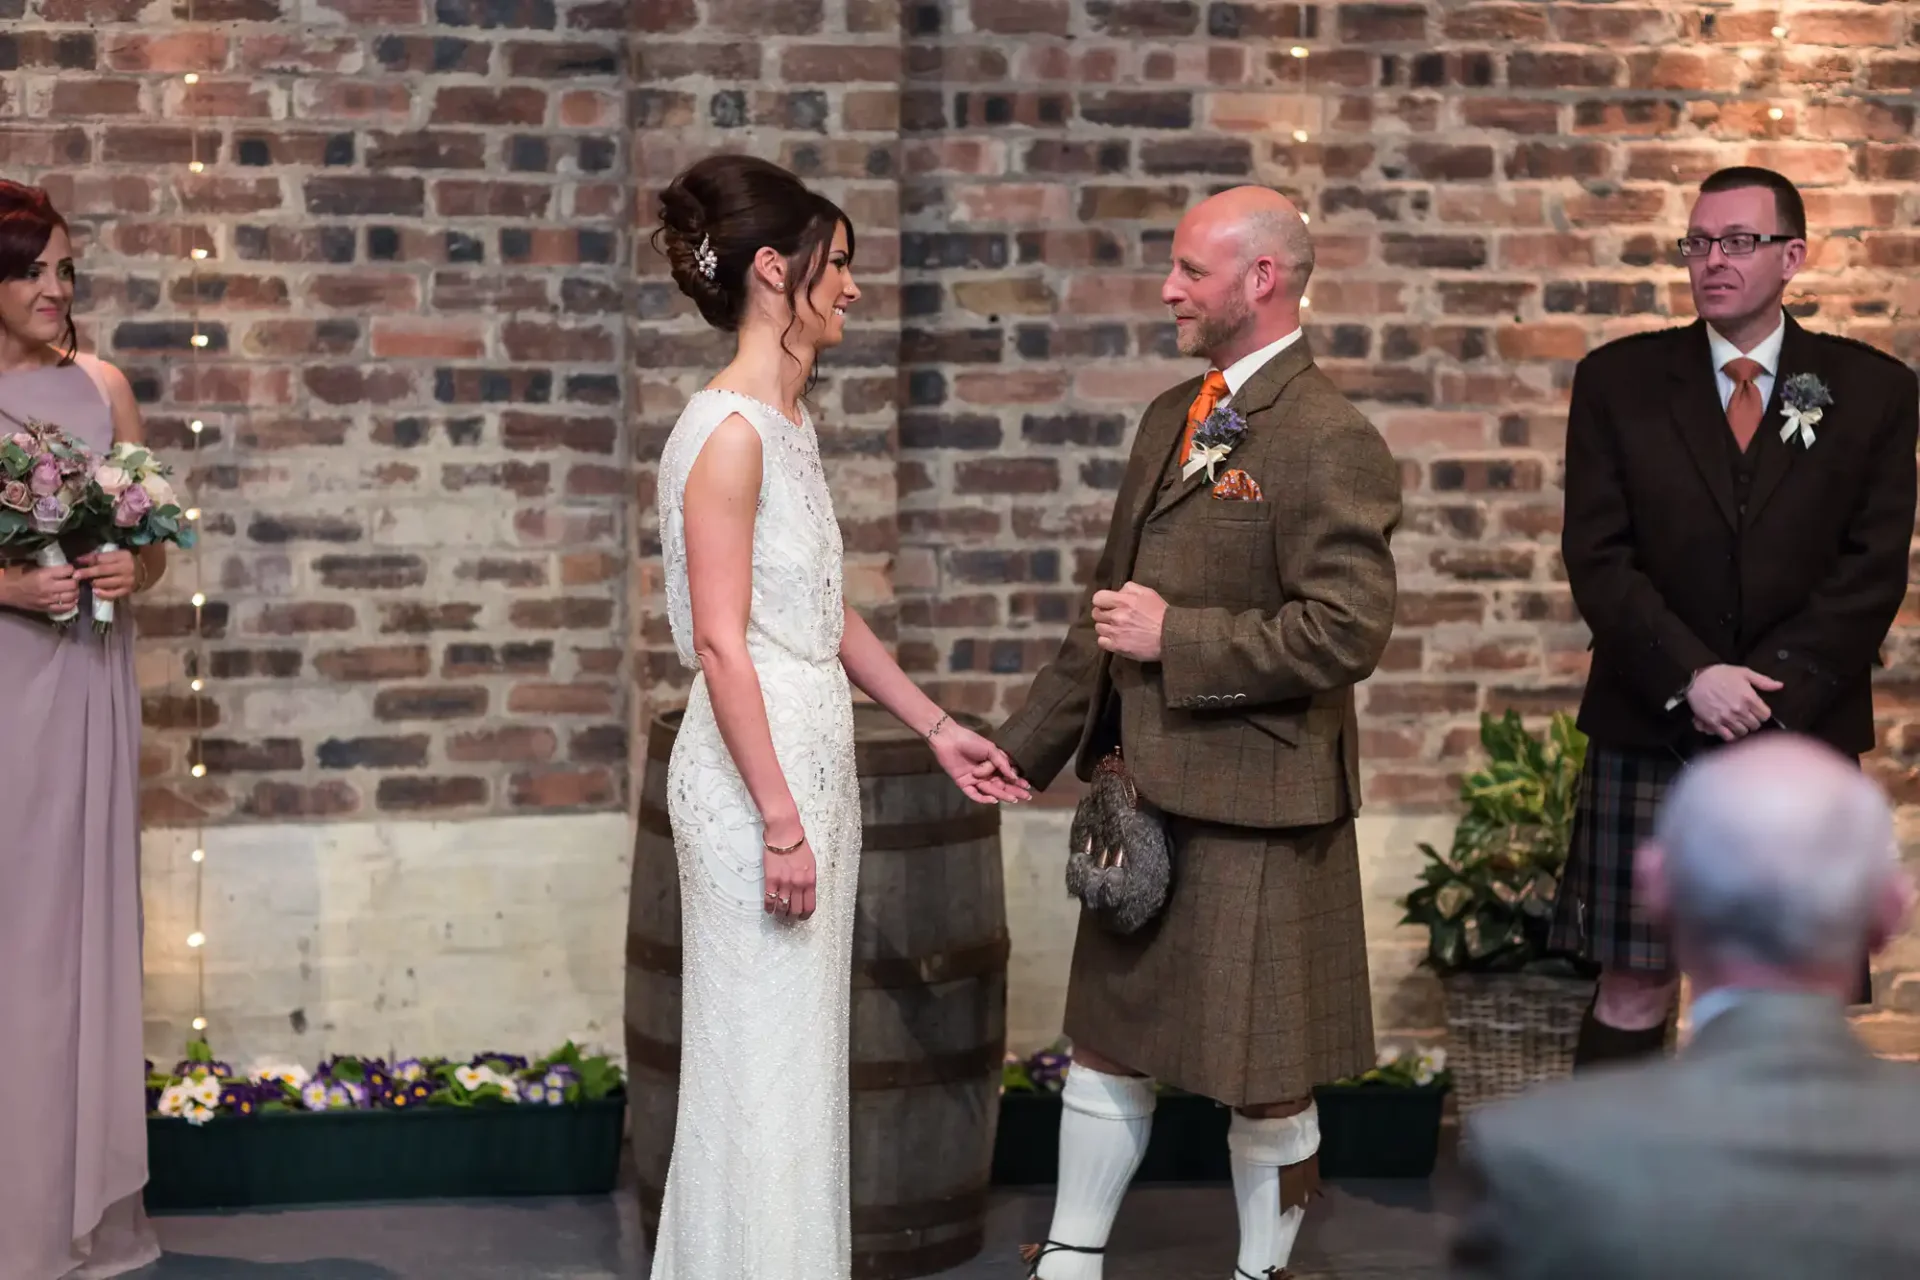 Bride and groom holding hands in wedding attire, groom in kilt, with witnesses nearby in a venue with brick walls.